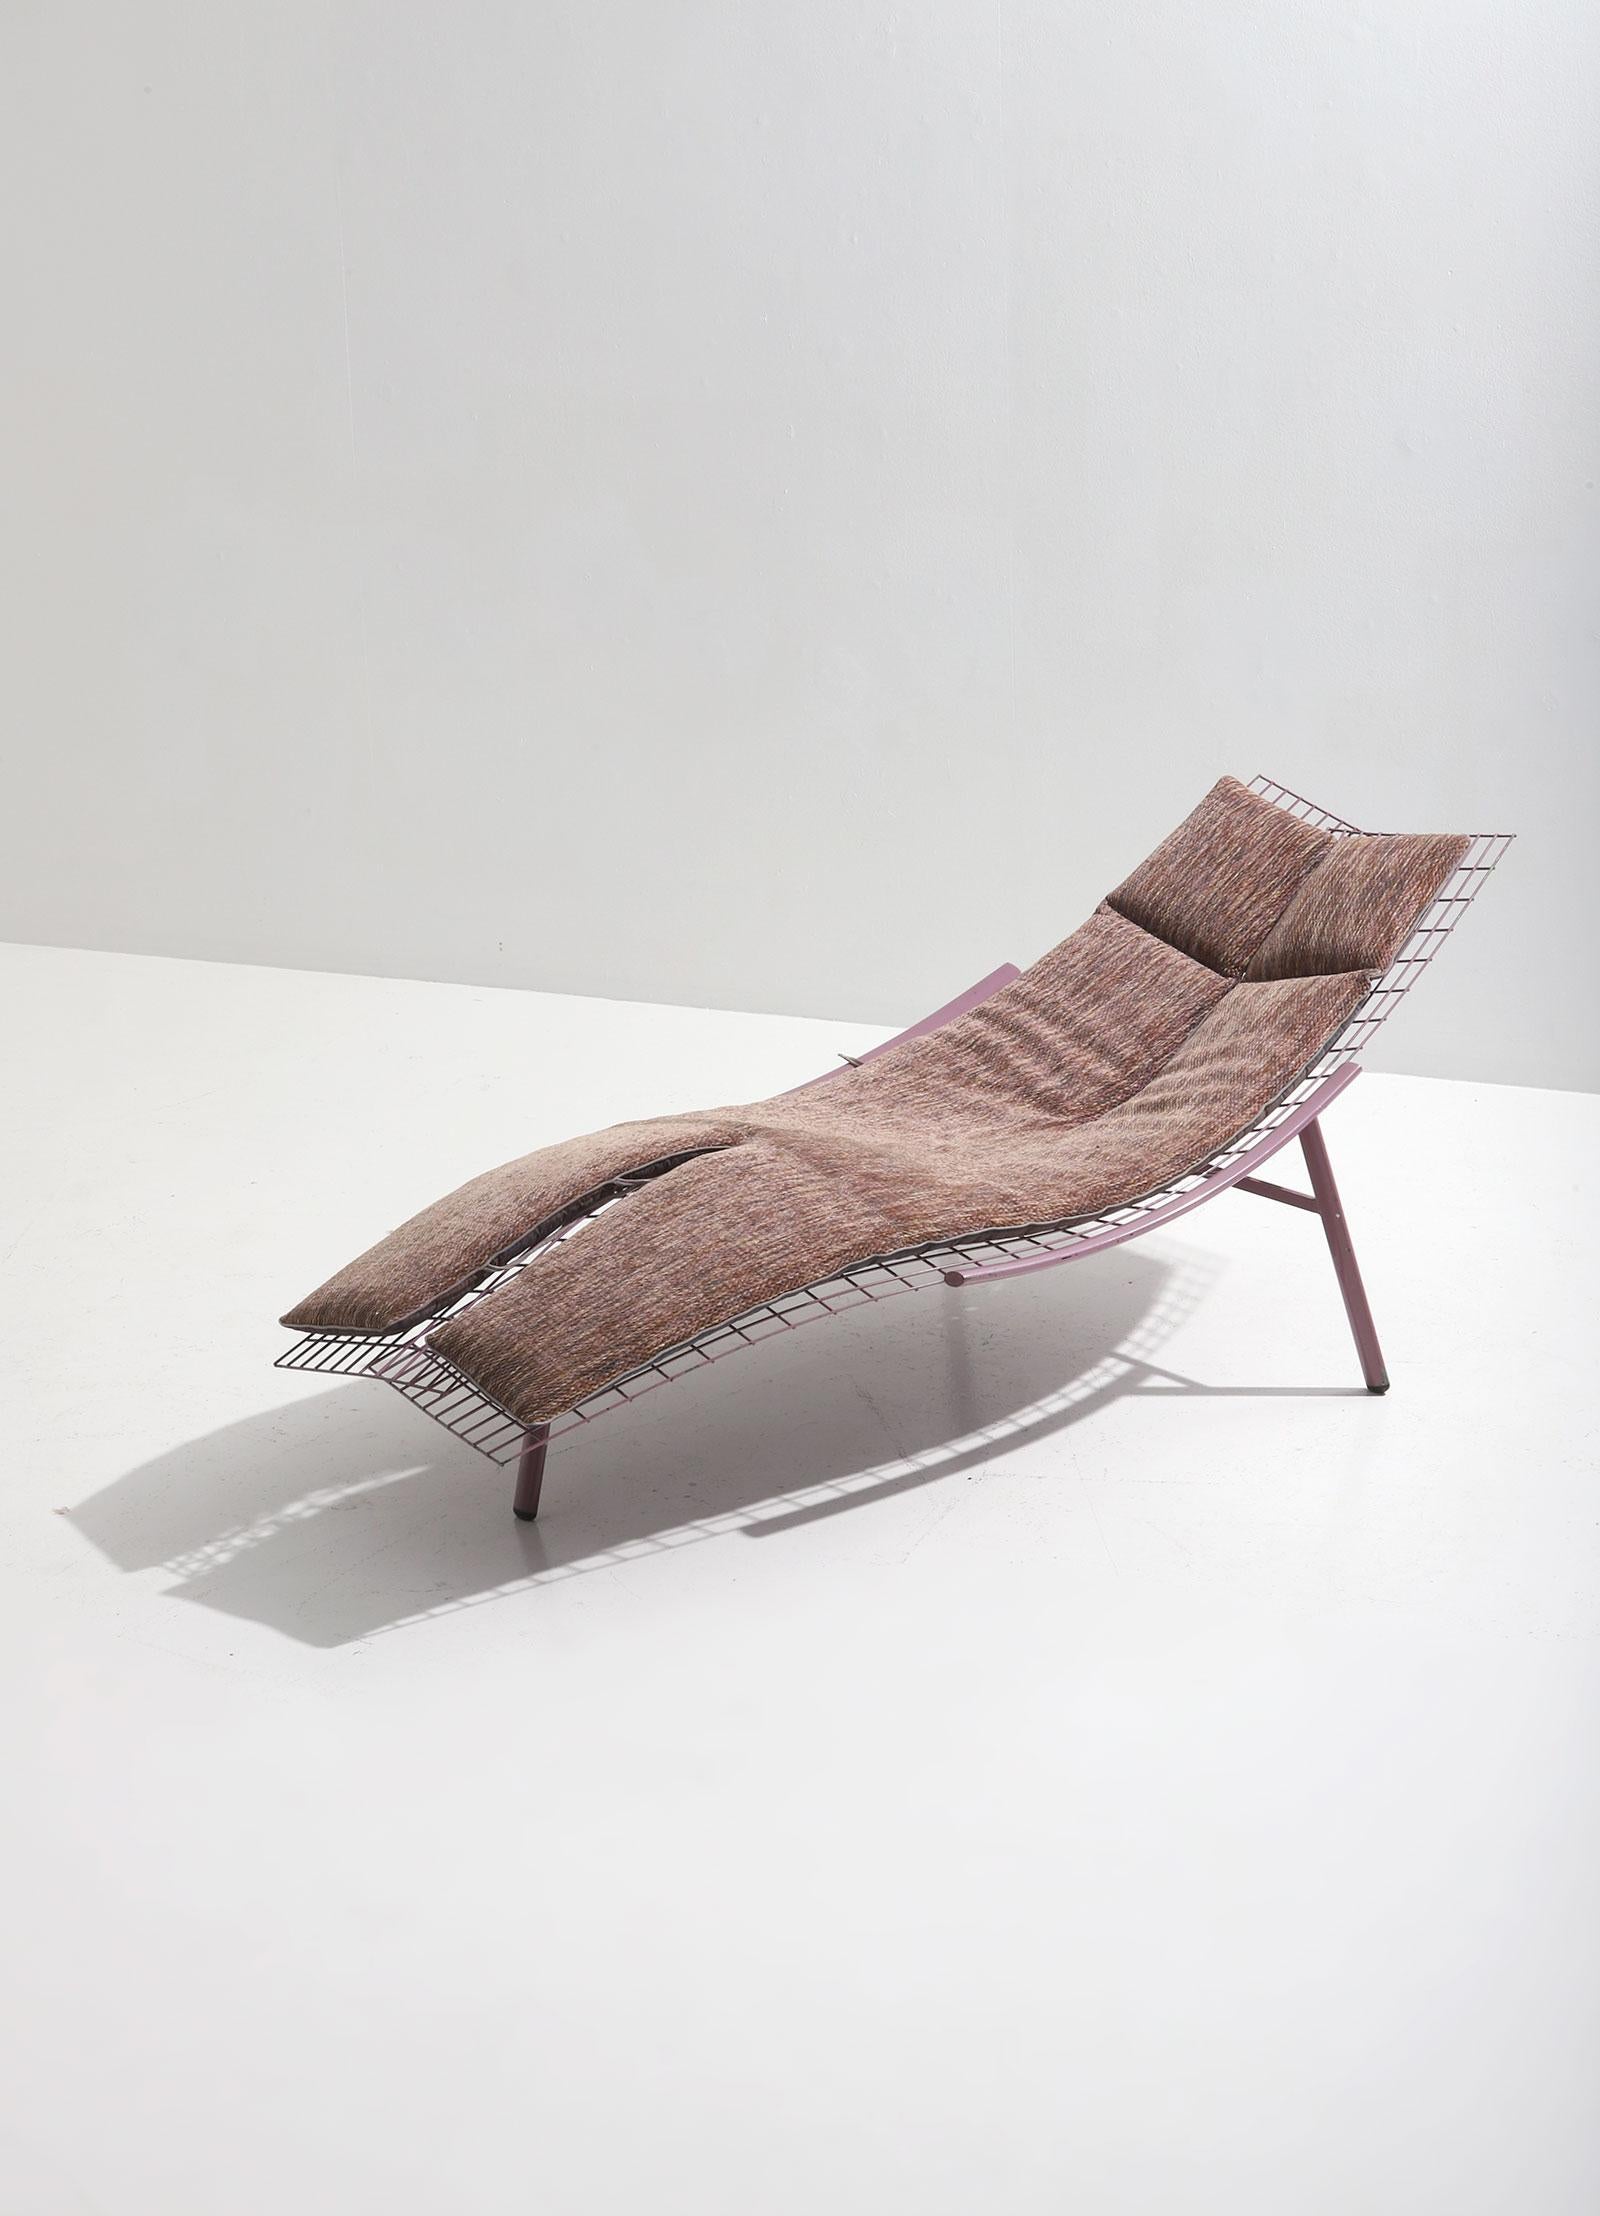 Italian designer Giovanni Offredi began designing in 1963. His designs represented the contrast between dynamic simplicity and the refined and finished form. This Swing lounge chair Offredi designed in the 1980s for the Italian company Saporiti. The